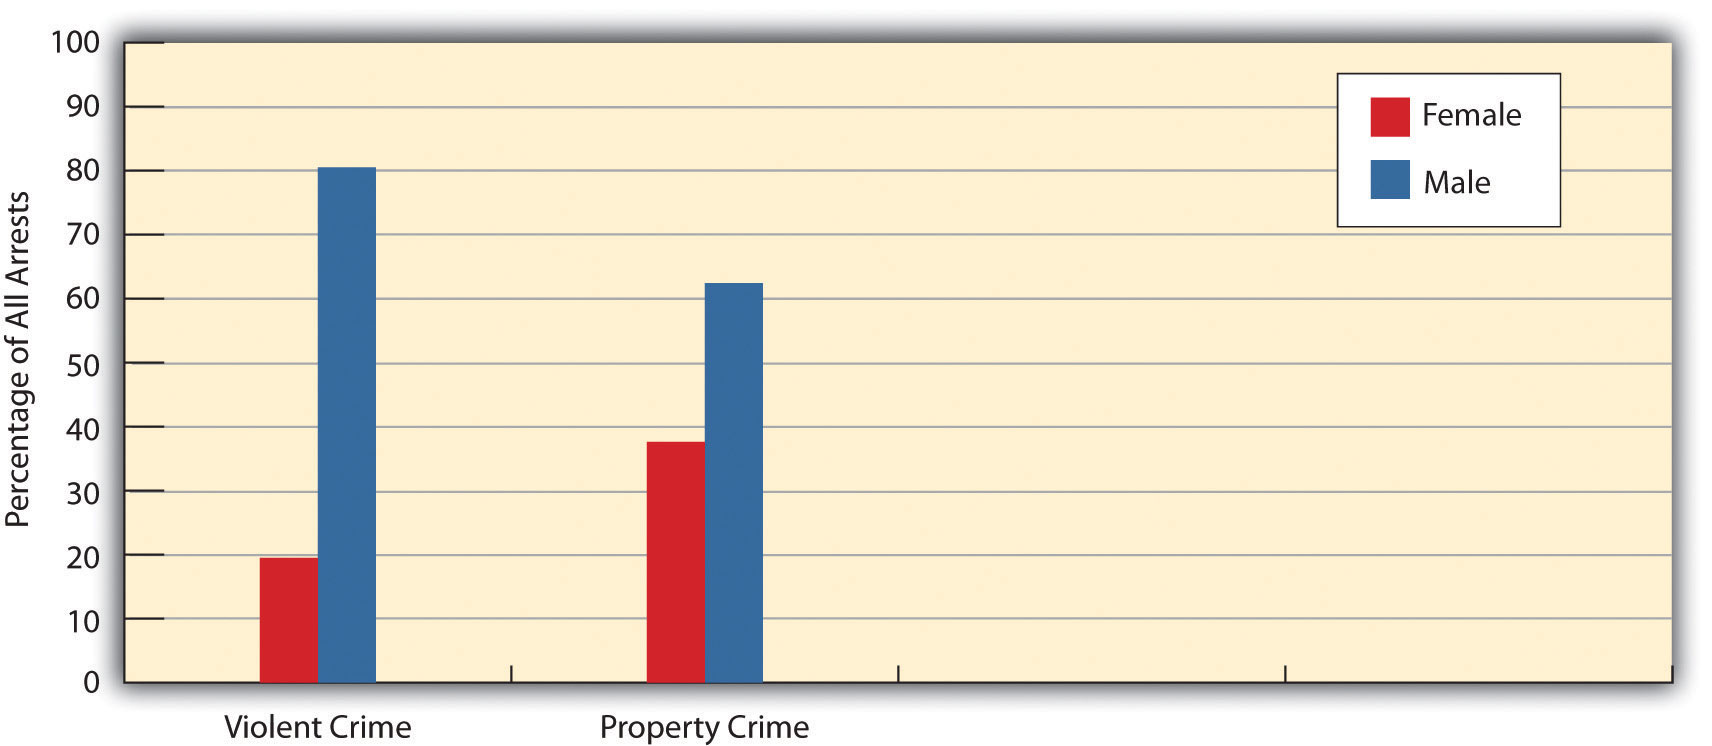 Gender and Arrest graph, showing the percentage of all arrests for men and women. This illustrates that men commit 80% of violent crime, and around 62% of property crime.